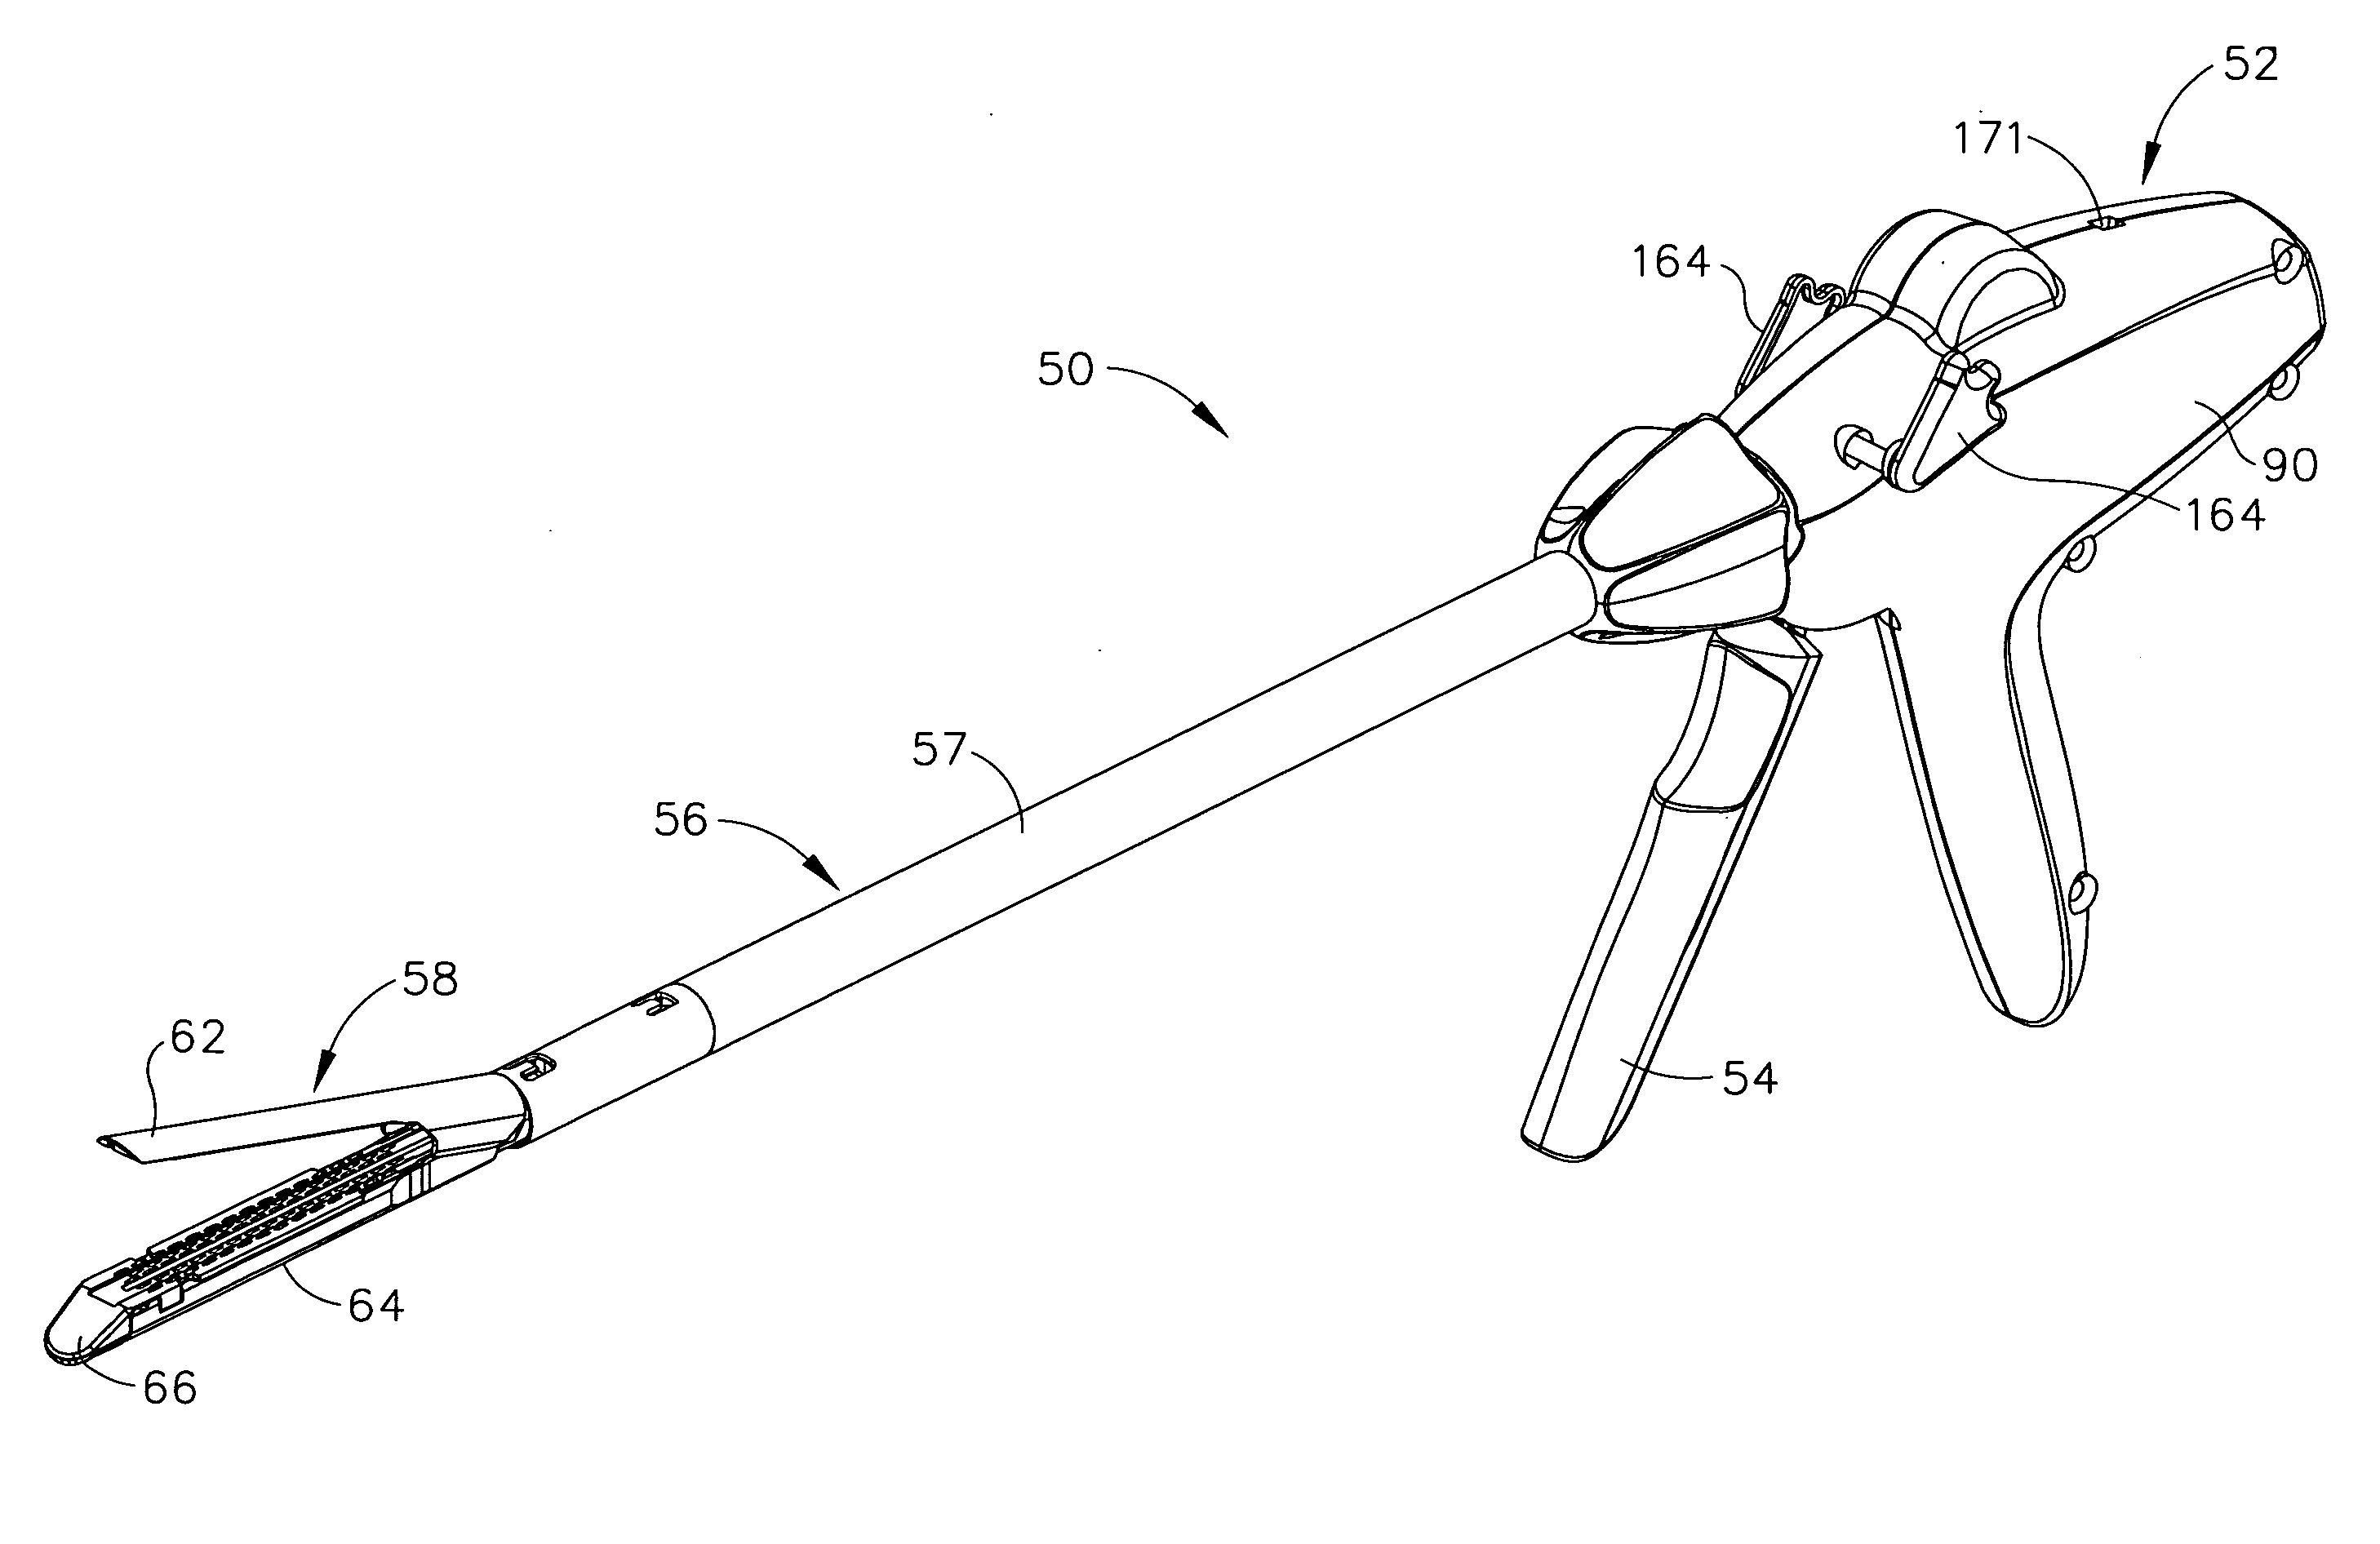 Surgical instrument having a directional switching mechanism